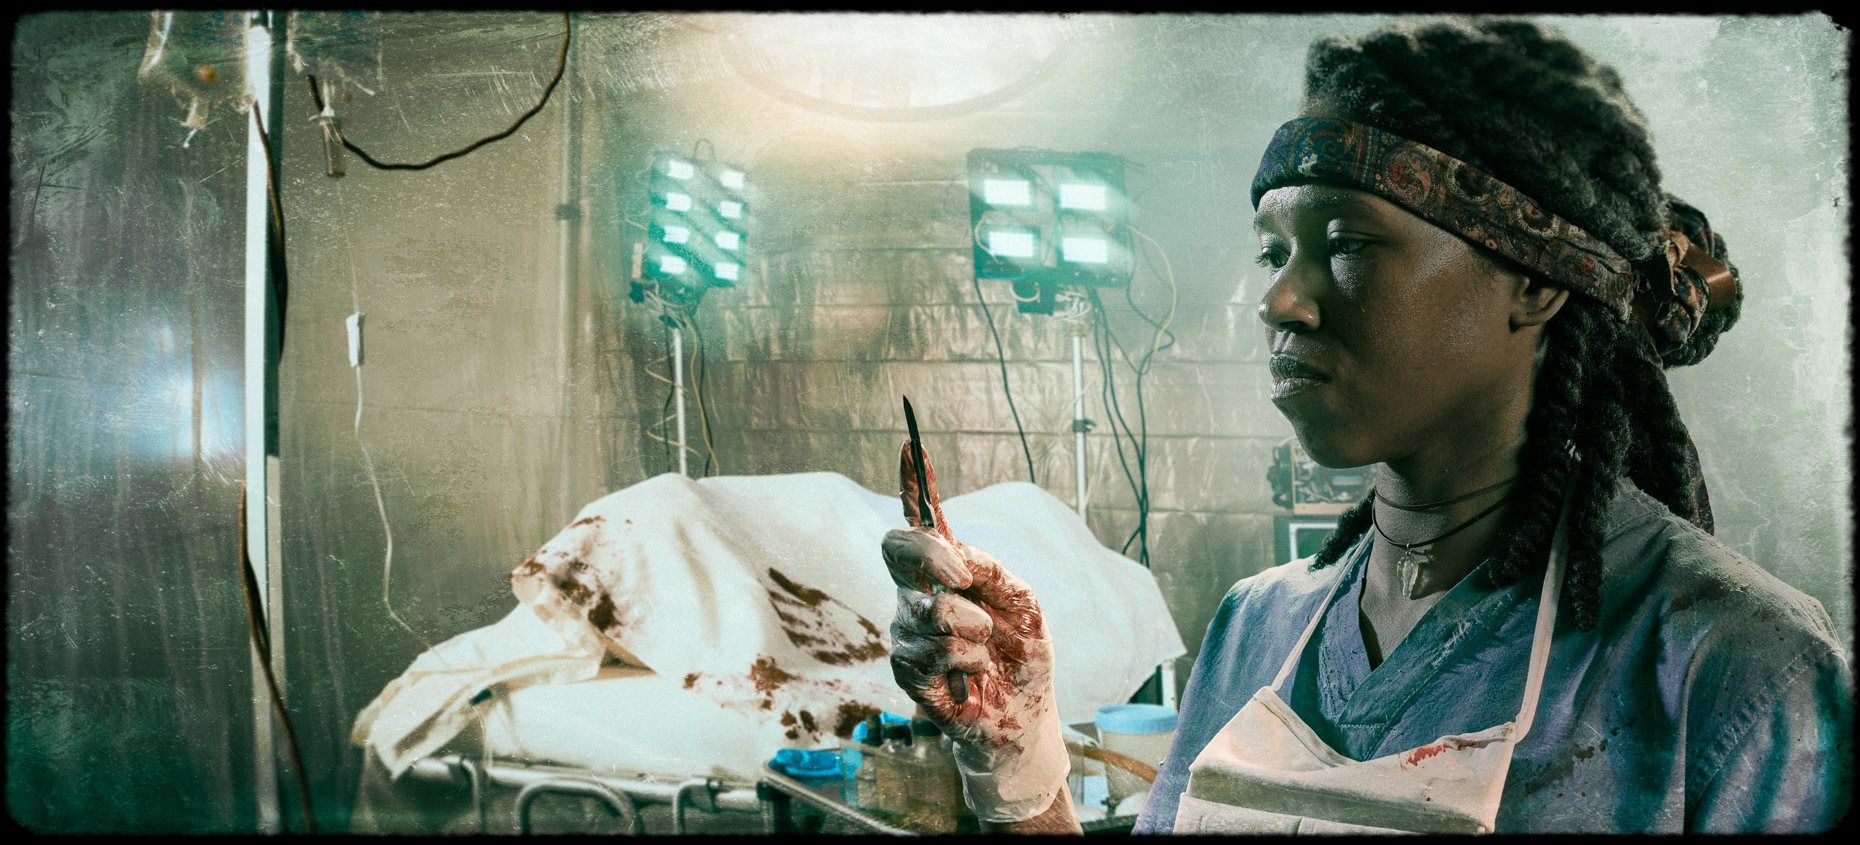 Livinia is the town surgeon, but she is not a doctor. From the Bad Choices Project created by Andy Batt and featuring actor Amber Starks.